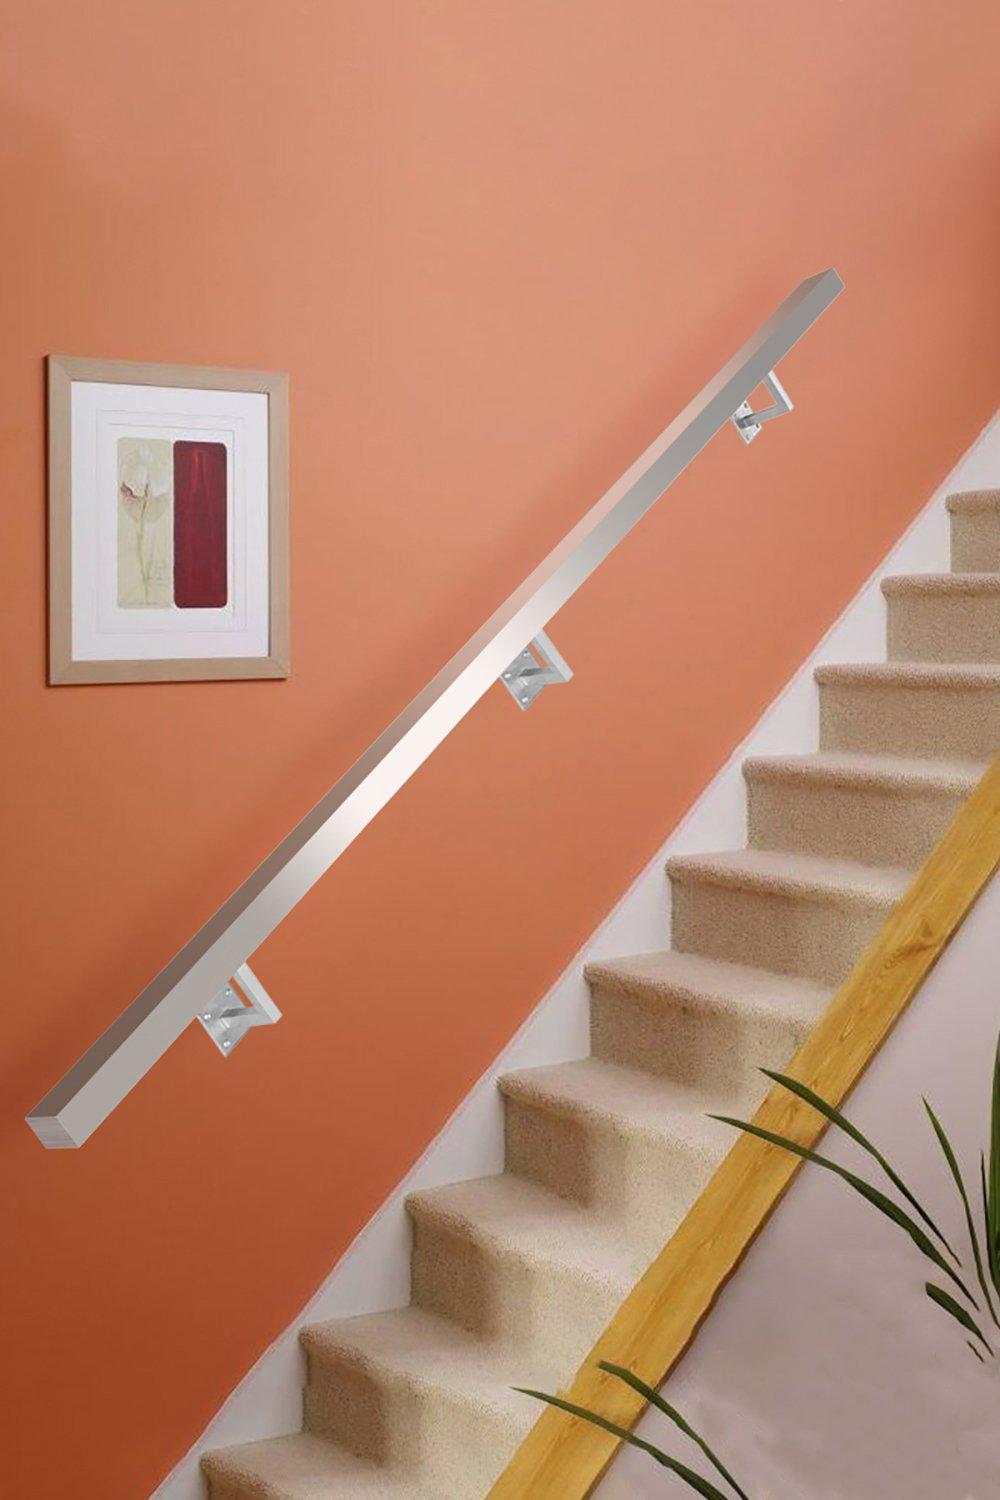 225*6*4CM Square Stainless Steel Wall Mounted Handrail with Brackets